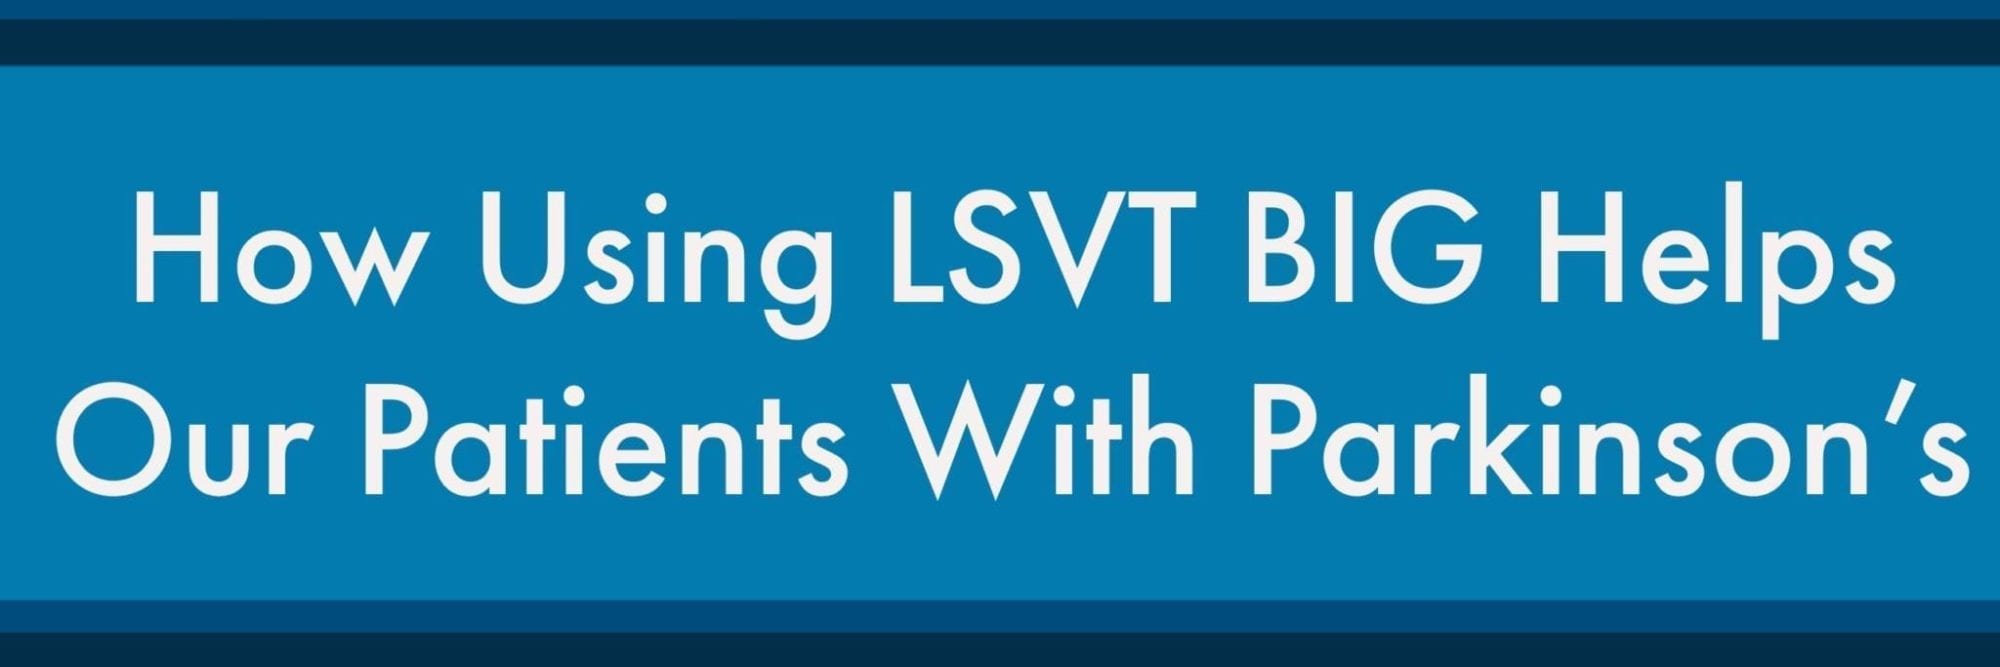 How to use LSVT BIG in #OT to Help our Patients with Parkinson's | SeniorsFlourish.com #occupationaltherapy #SNFOT #HomehealthOT #OTtreatmentideas #OTlove